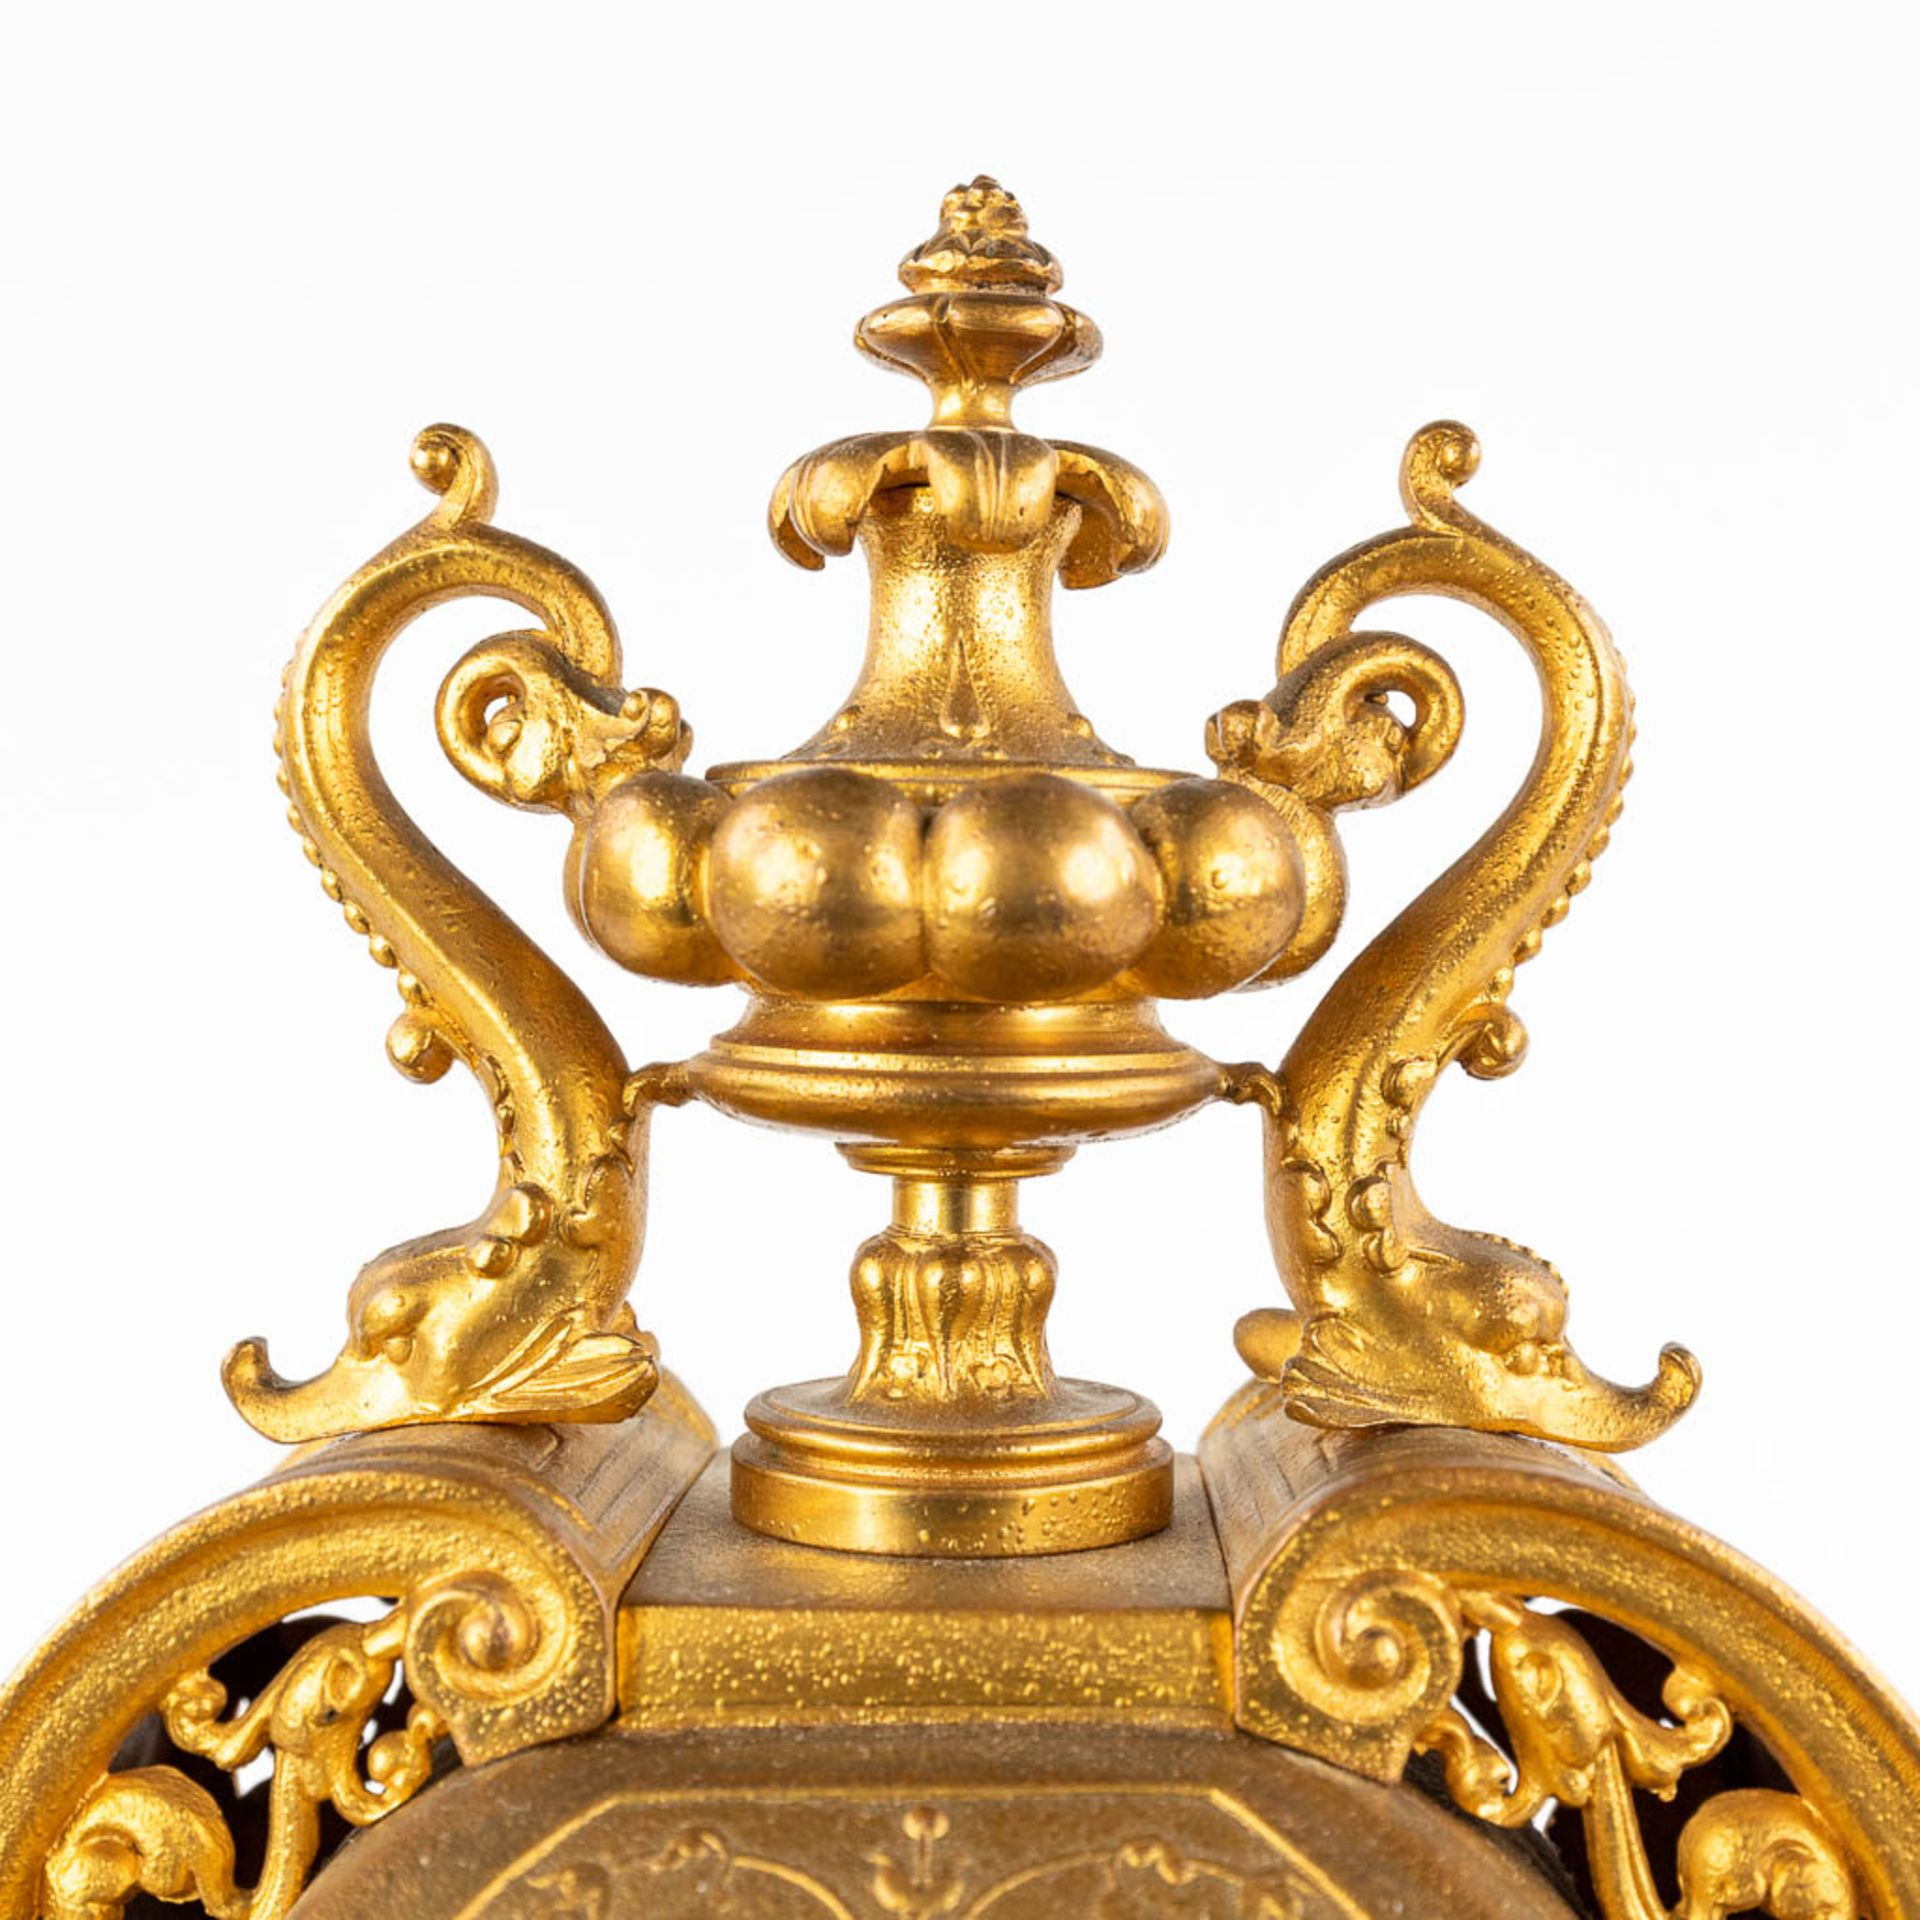 A mantle clock, Neoclassical style, gilt spelter. 19th C. (D:13 x W:27 x H:40 cm) - Image 8 of 13